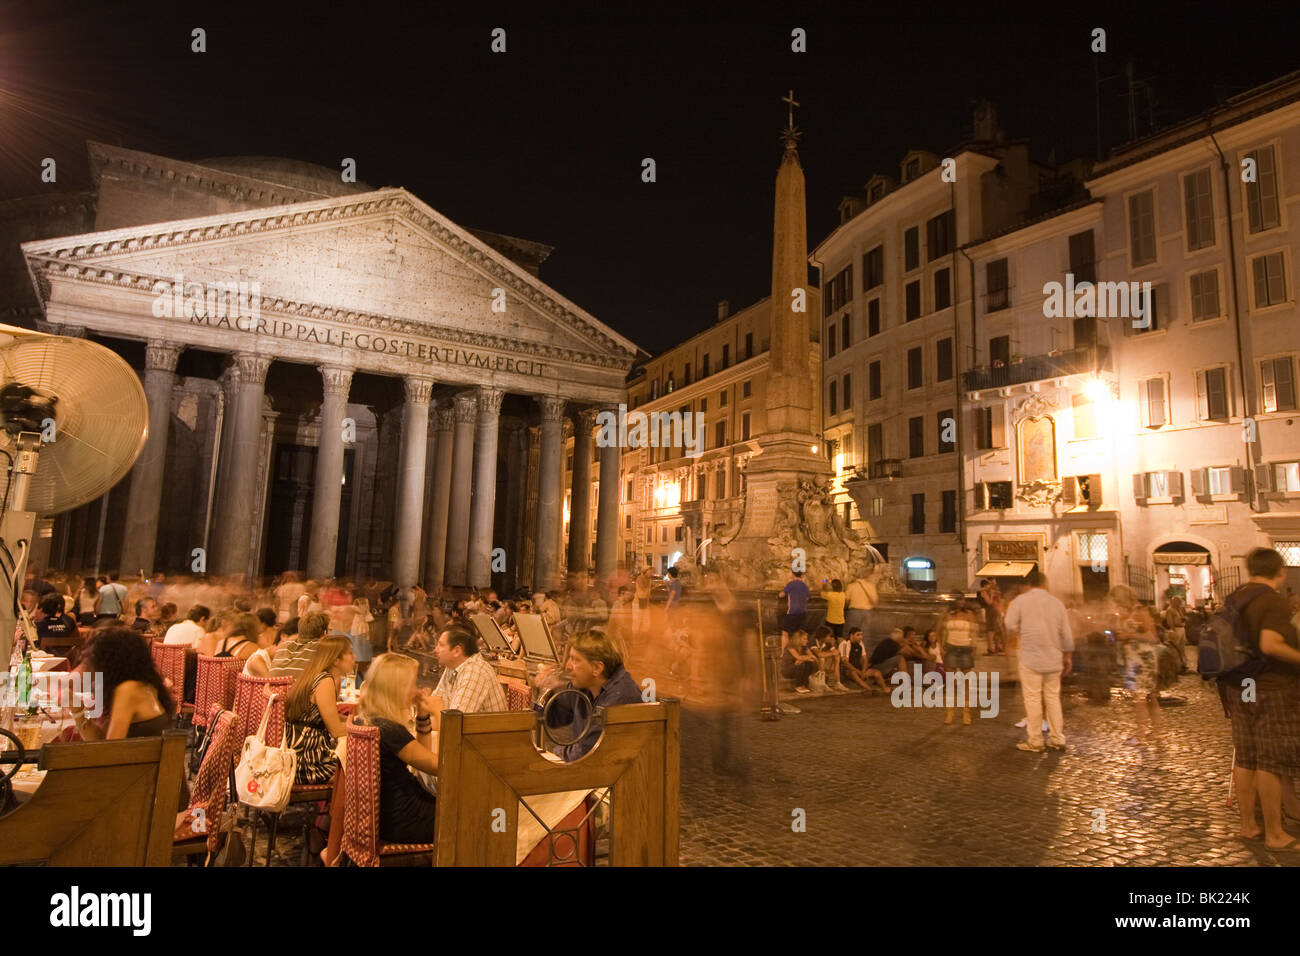 Piazza della Rotonda and Pantheon ad night, with people eating and drinking at restaurants and bars. Rome, Italy Stock Photo